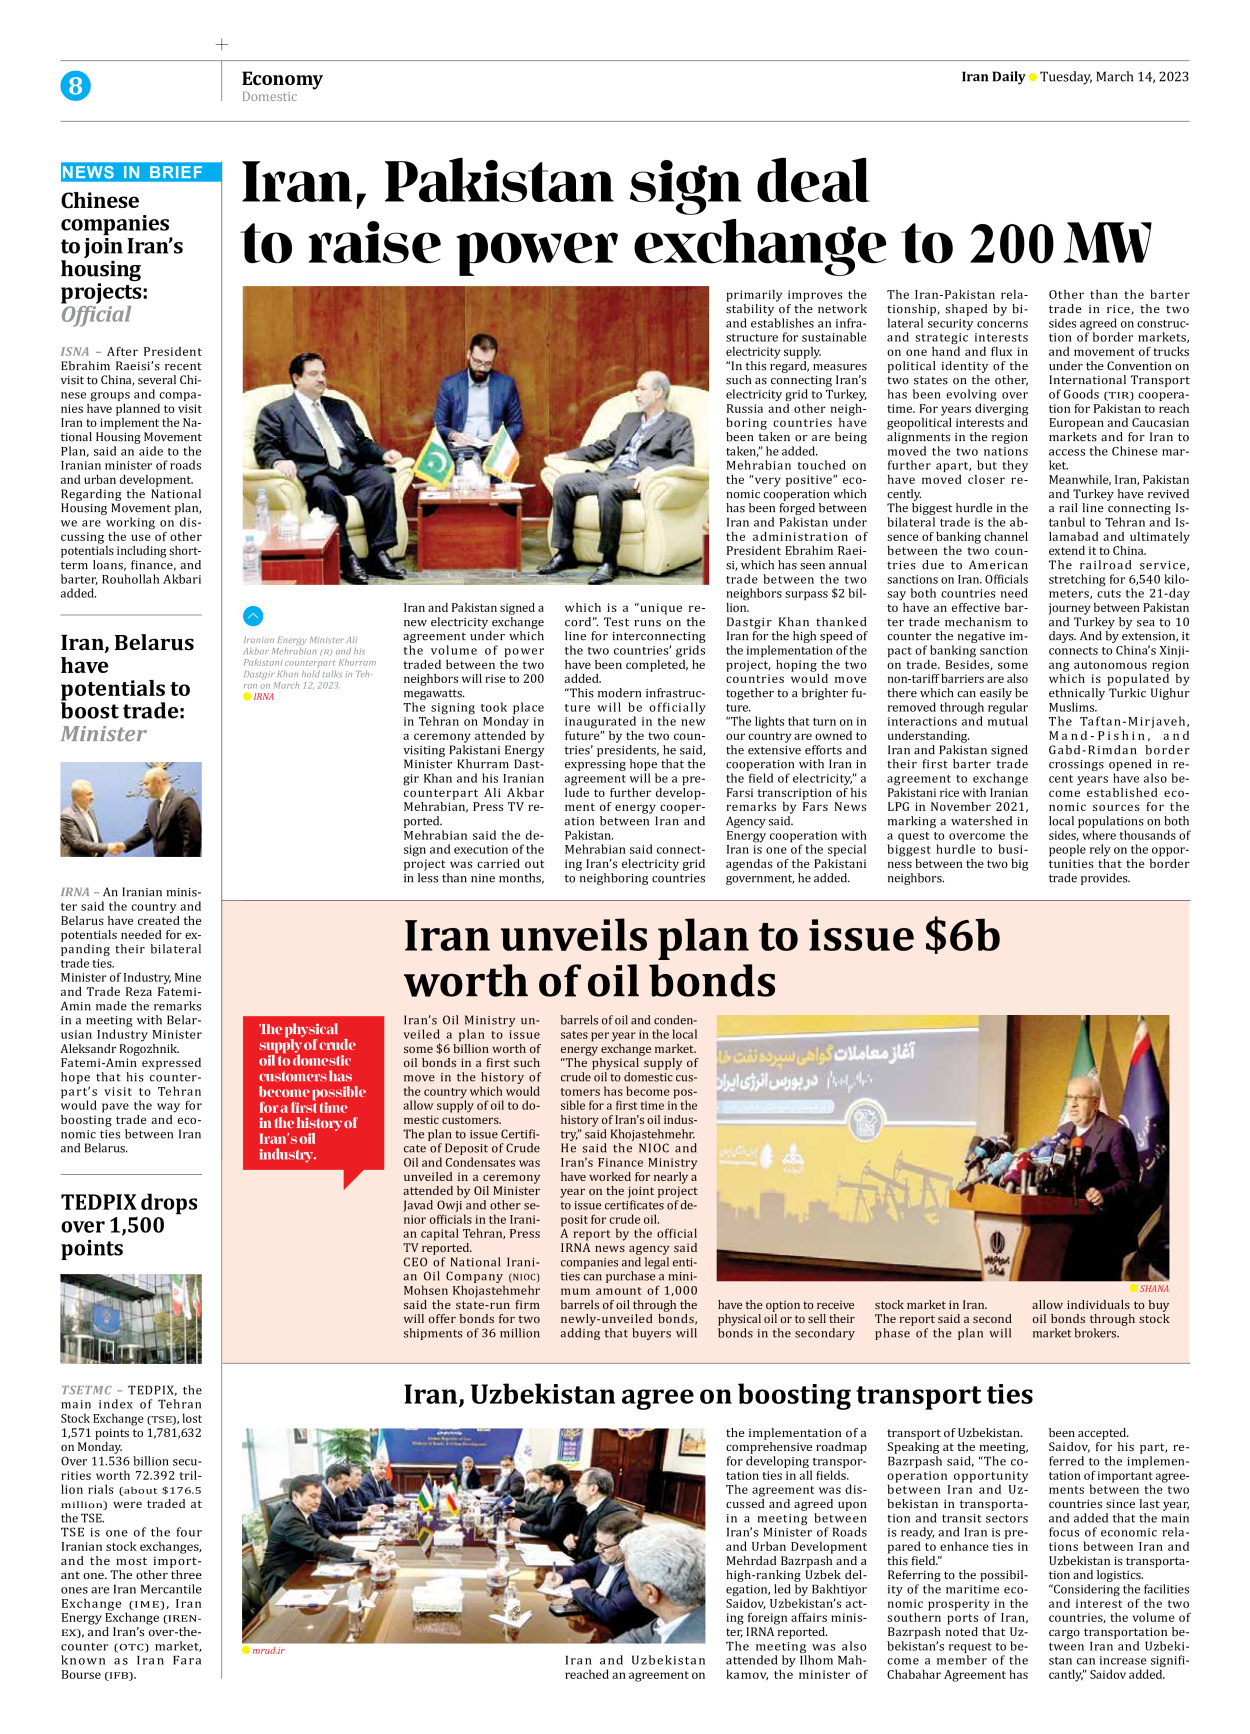 Iran Daily - Number Seven Thousand Two Hundred and Fifty Seven - 14 March 2023 - Page 8